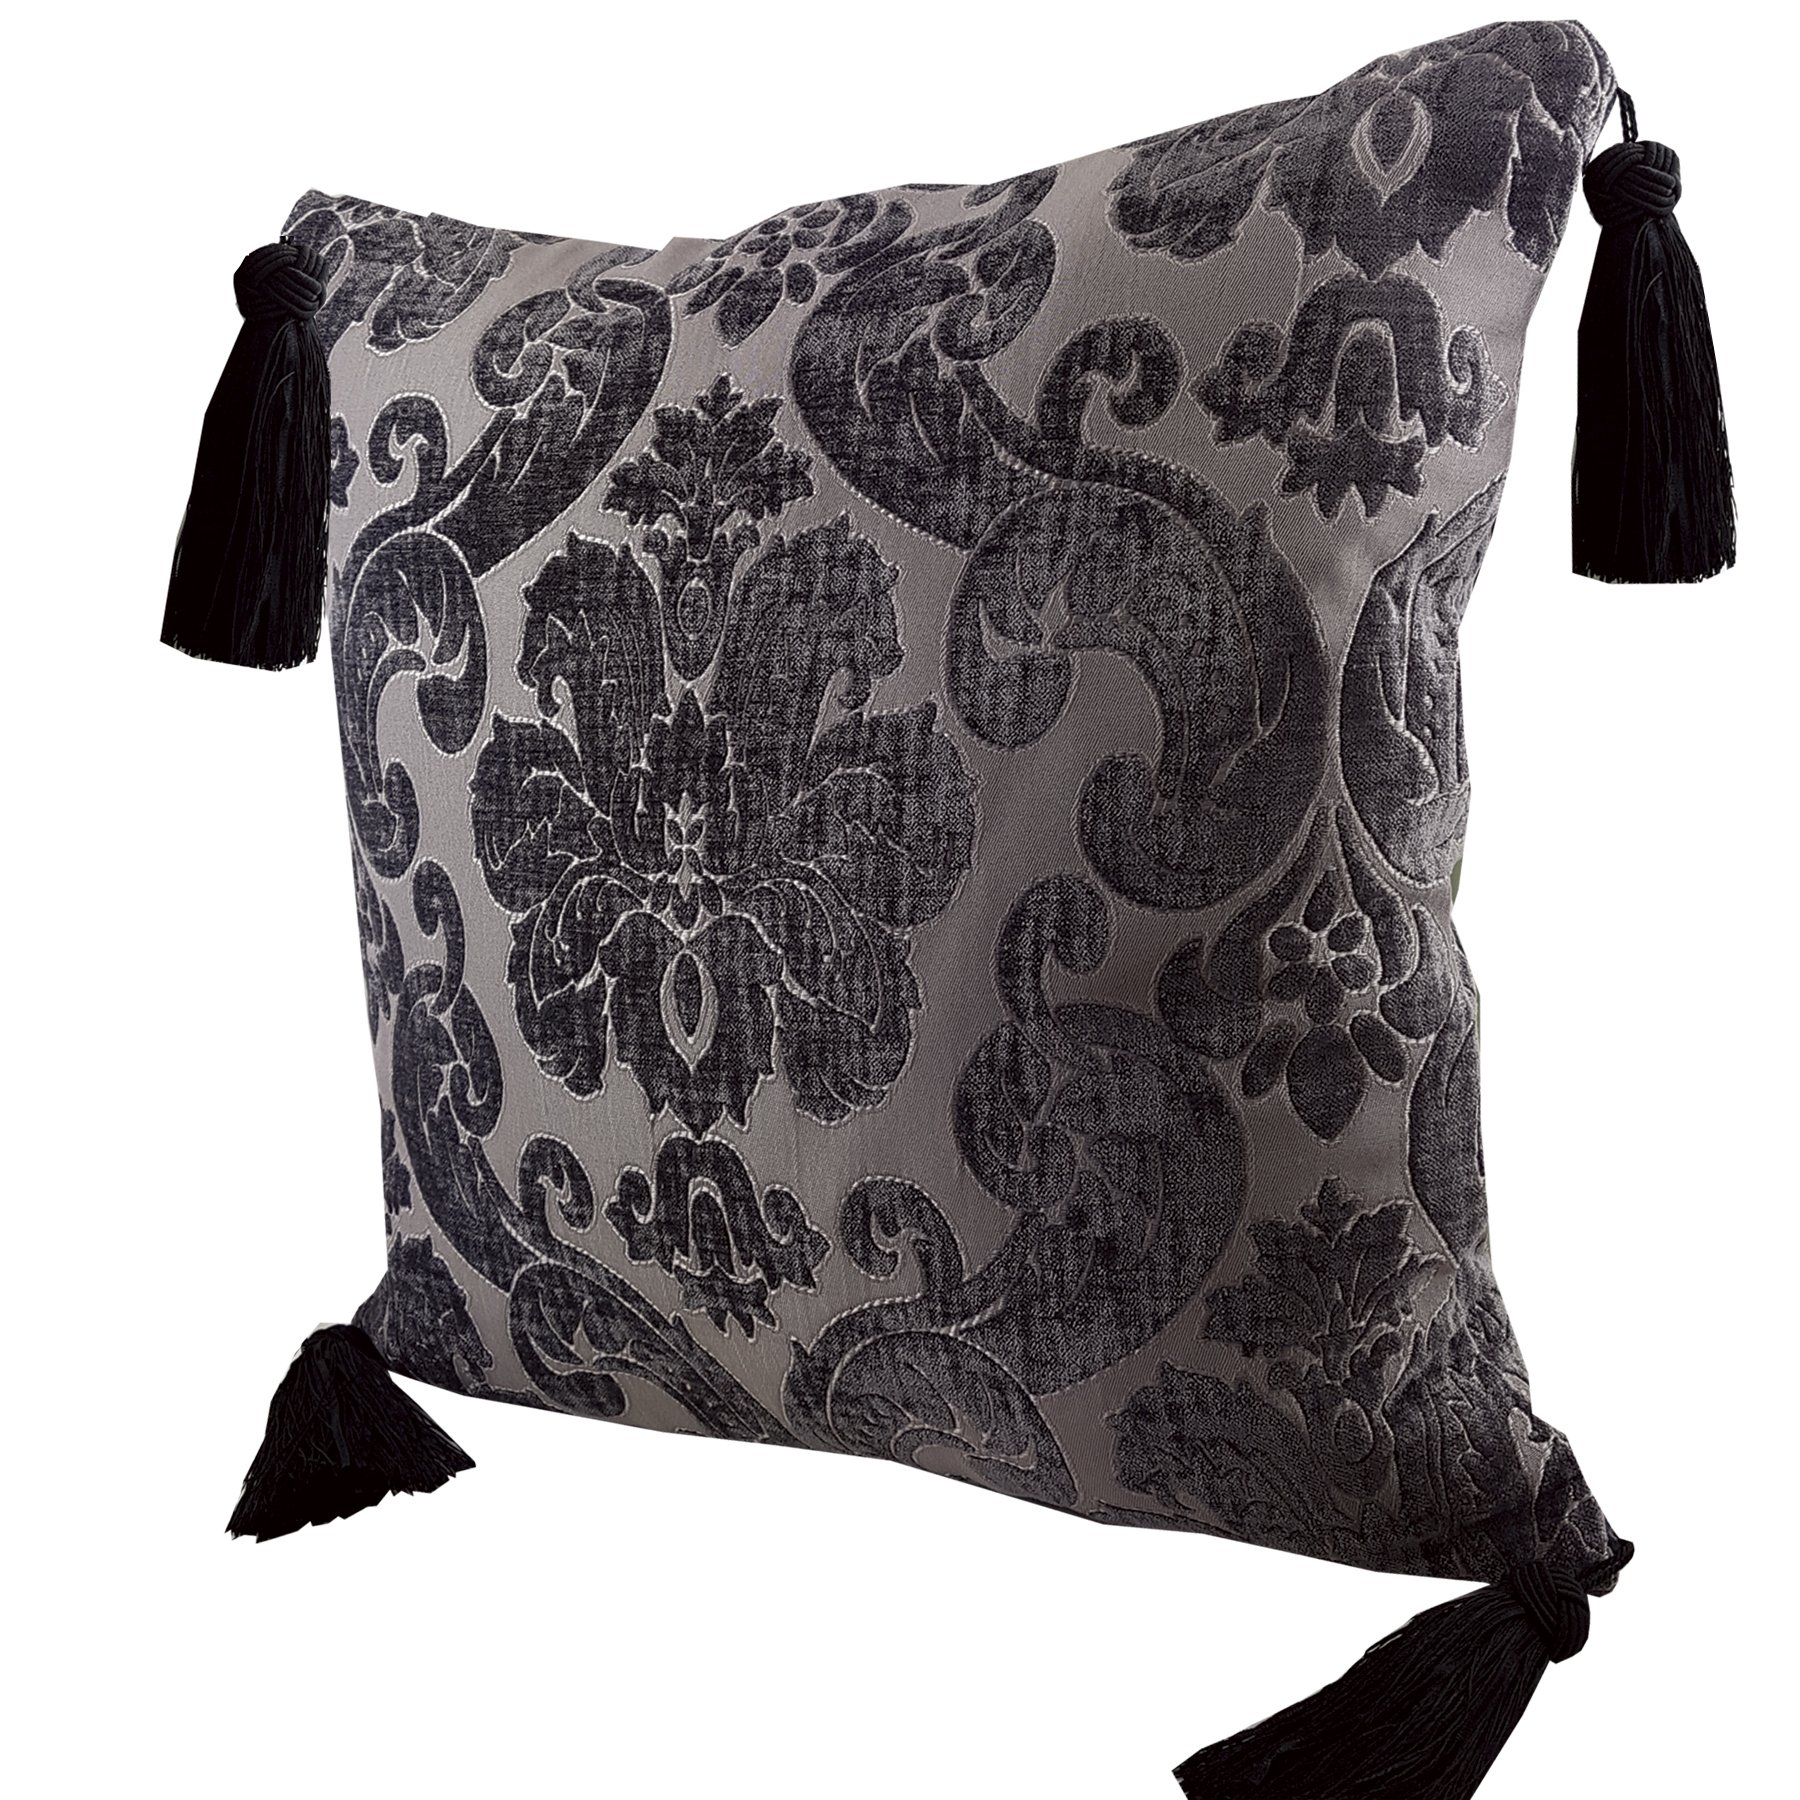 Pair of Chenille cushion covers 45cm x 45cm - French Silver / Aubergine colour with Black Turks Head tassels